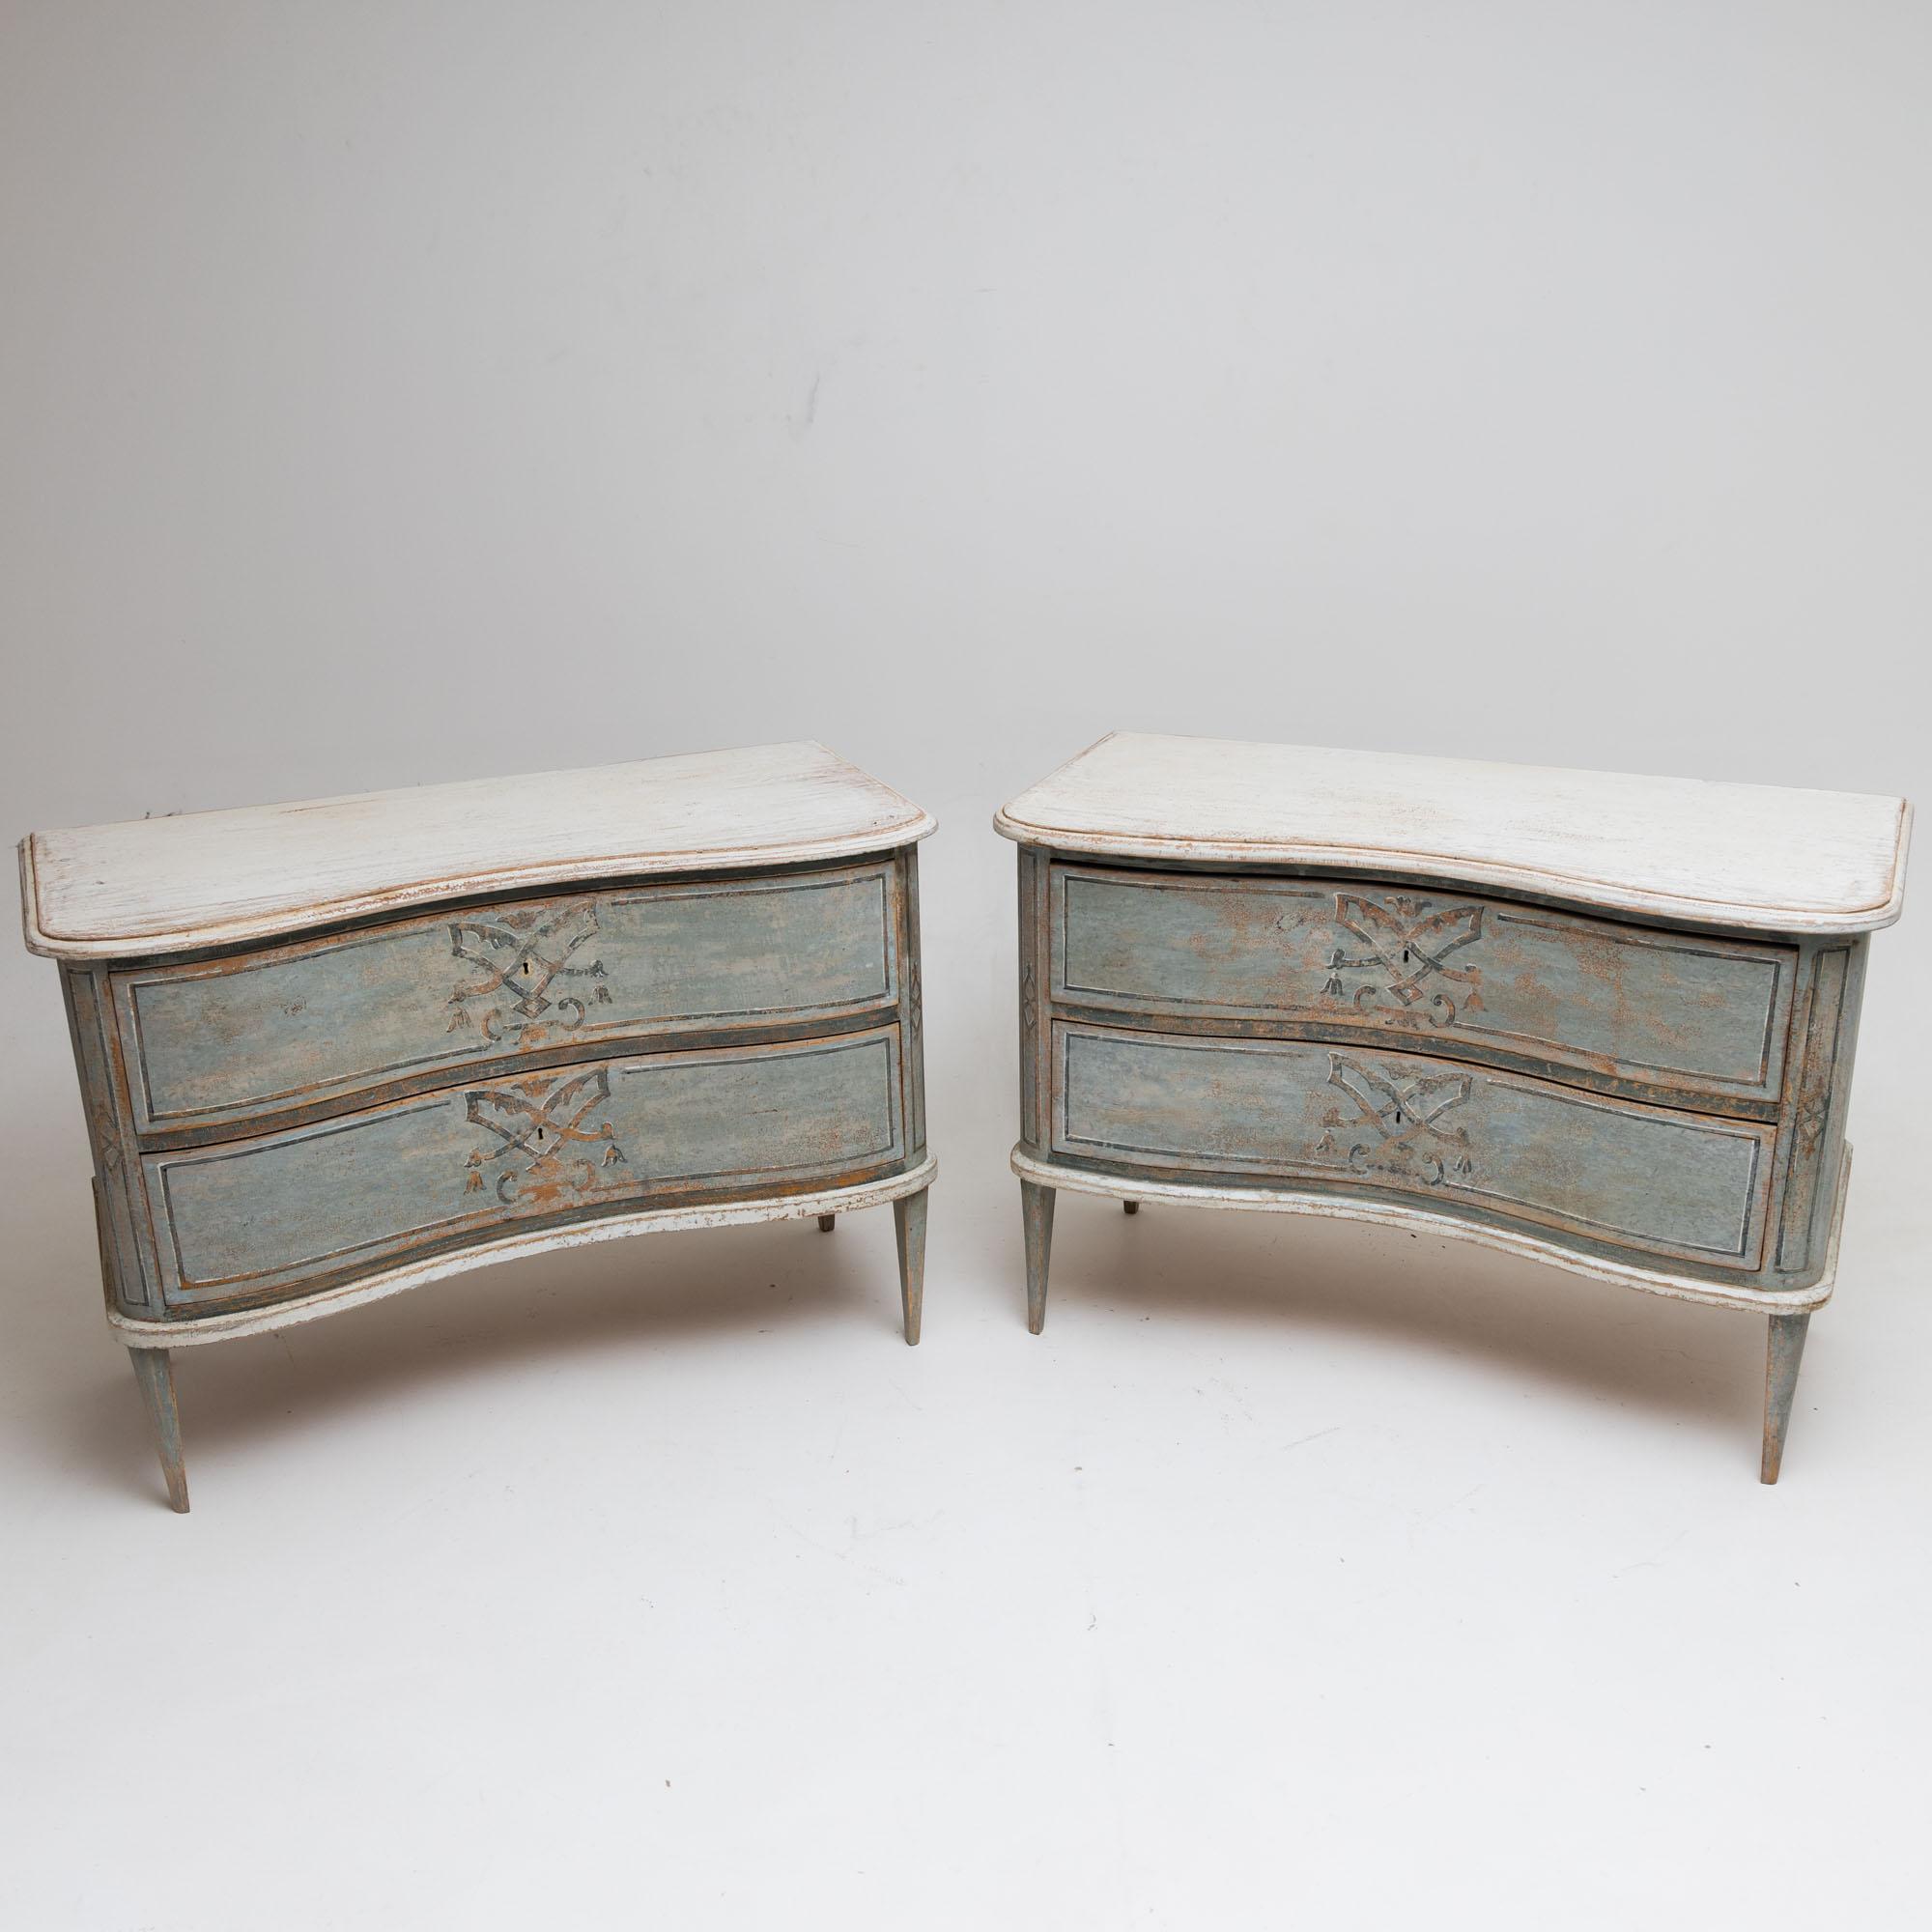 Softwood Pair of Painted Chests of Drawers, Denmark, Late 19th Century